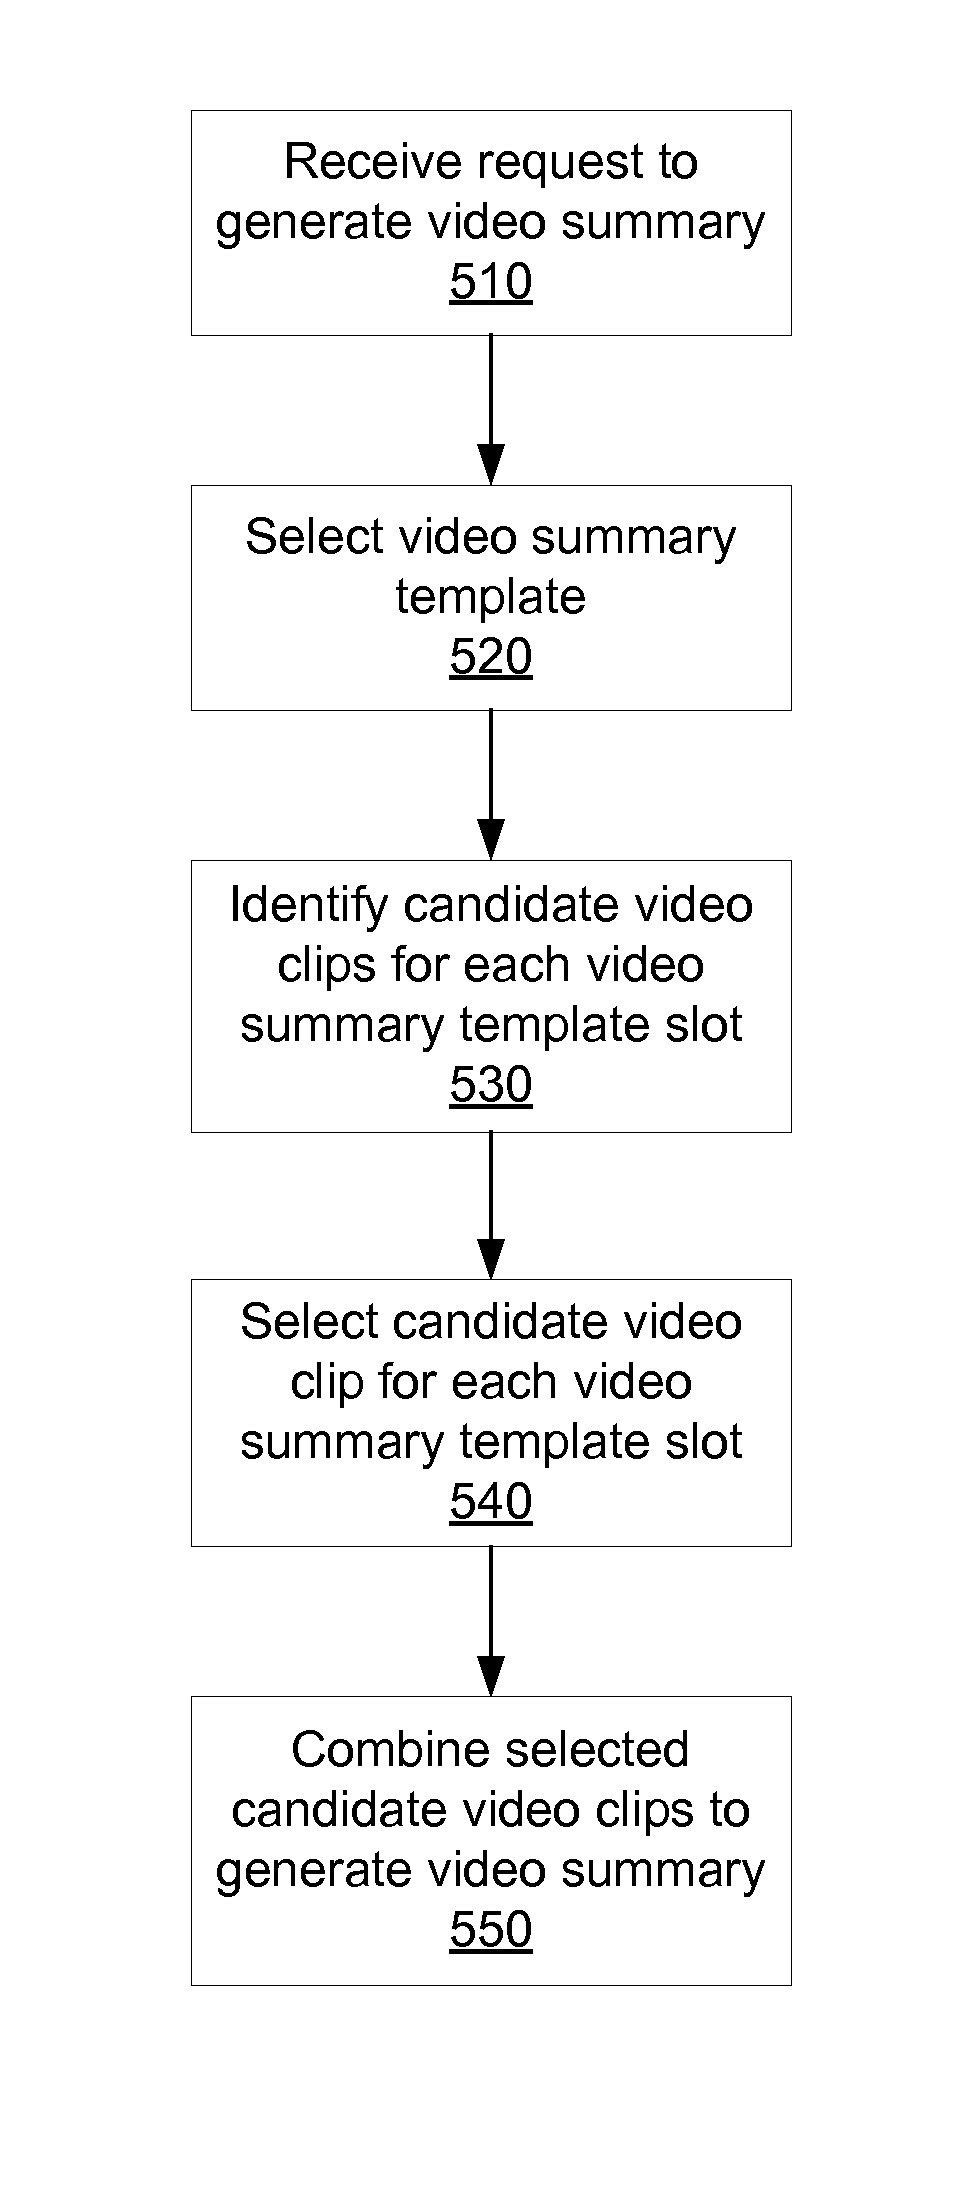 Generating video summaries for a video using video summary templates